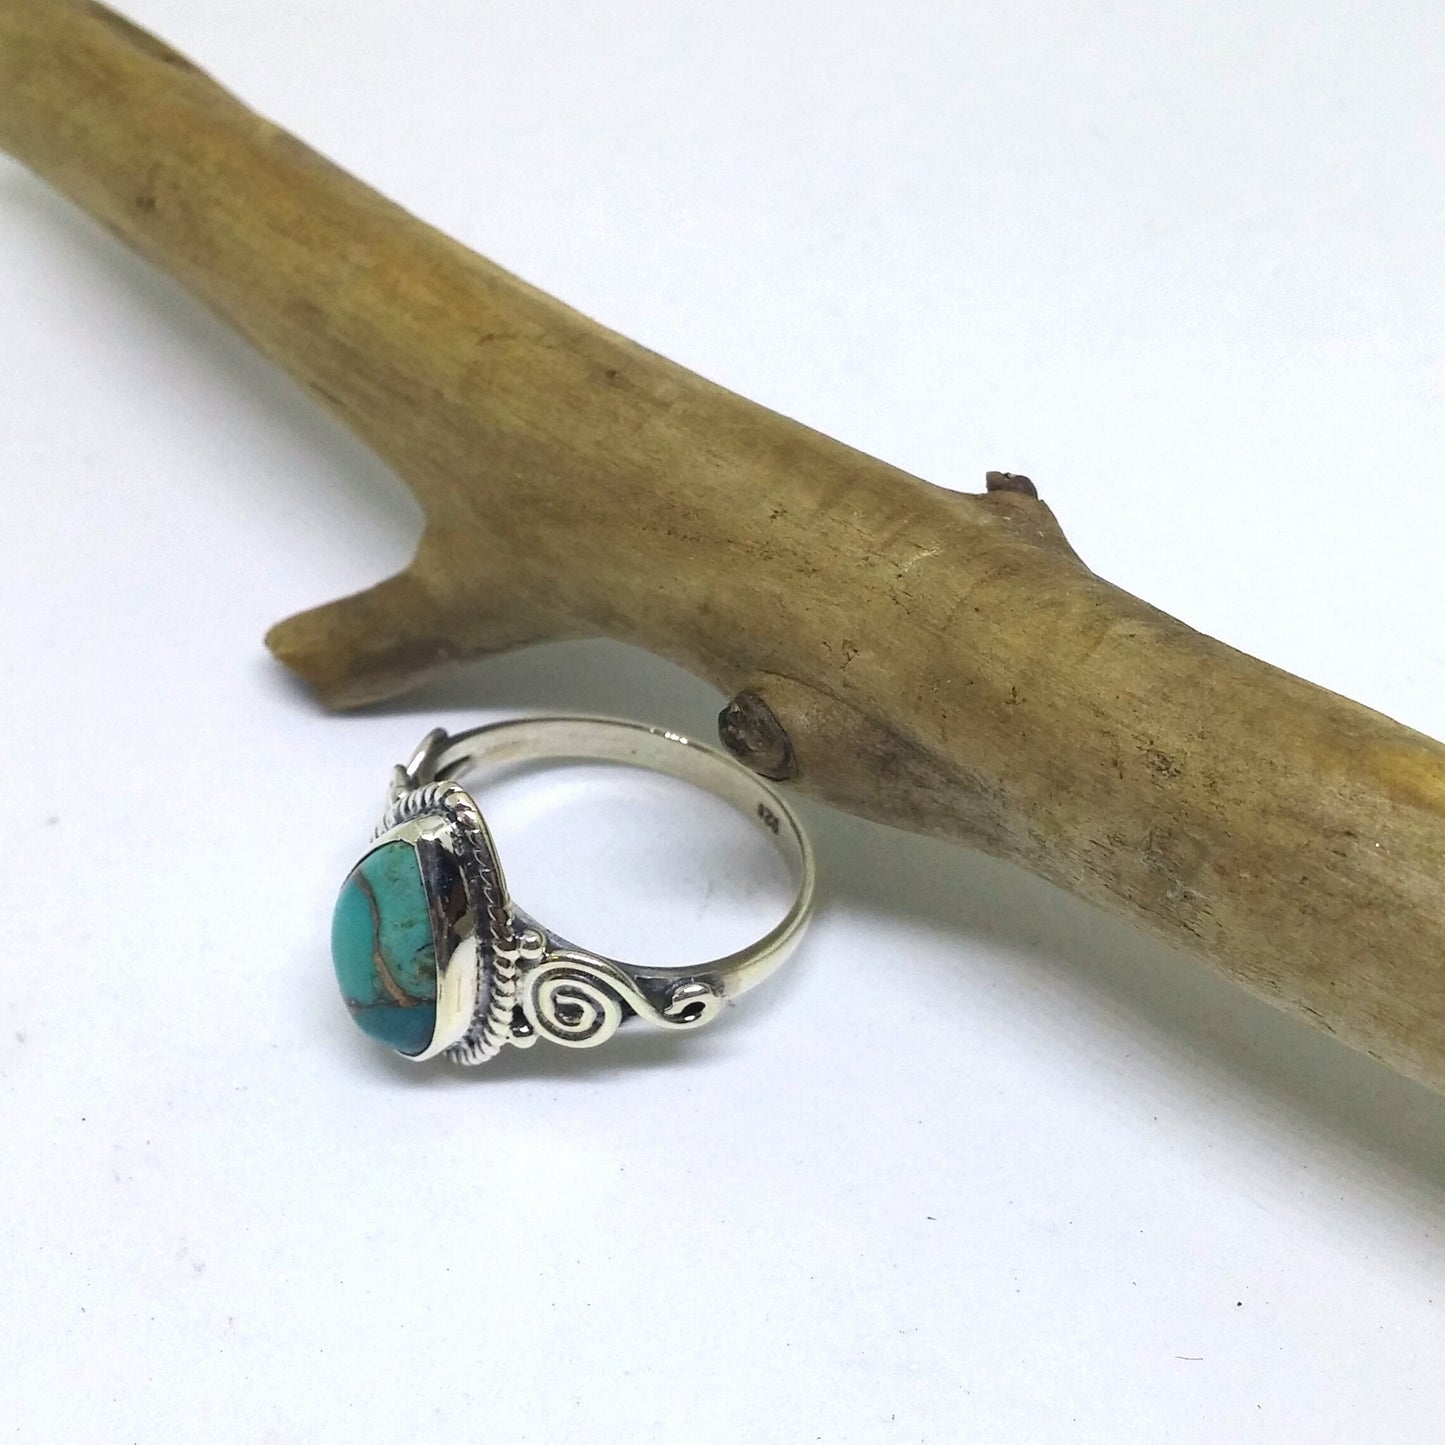 BLUE COPPER TURQUOISE TEARDROP RING IN STERLING SILVER WITH DOTTED AND SWIRLED DESIGN-RINGS-Jipsi Junk-JipsiJunk